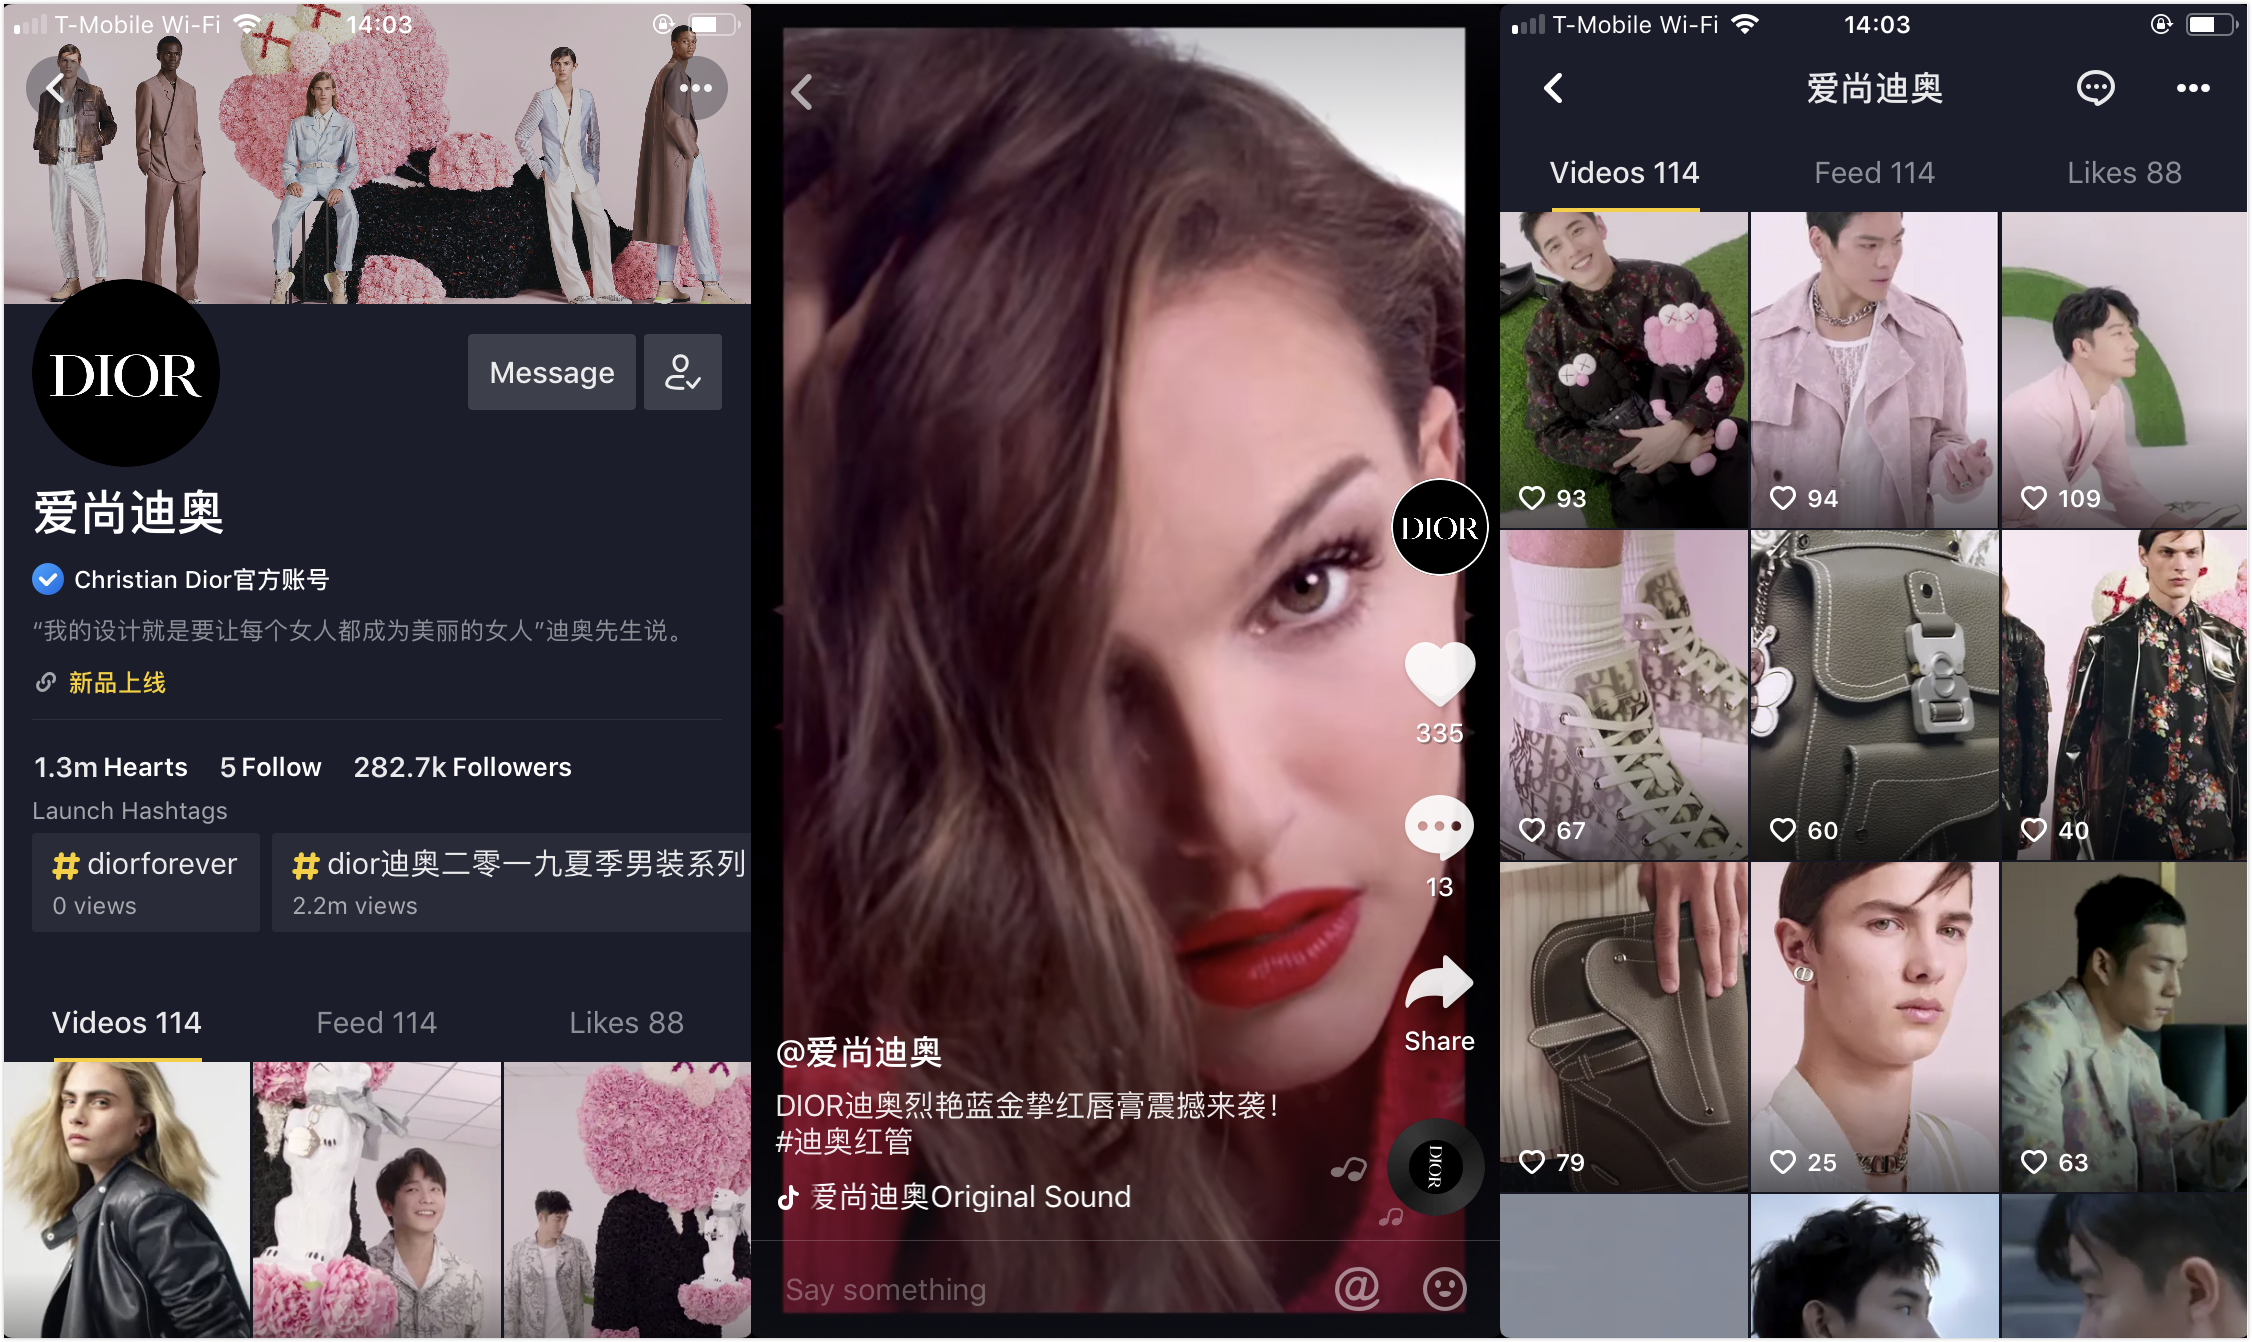 Louis Vuitton Utilizes WeChat for Viral Nike Collaboration in China – WWD